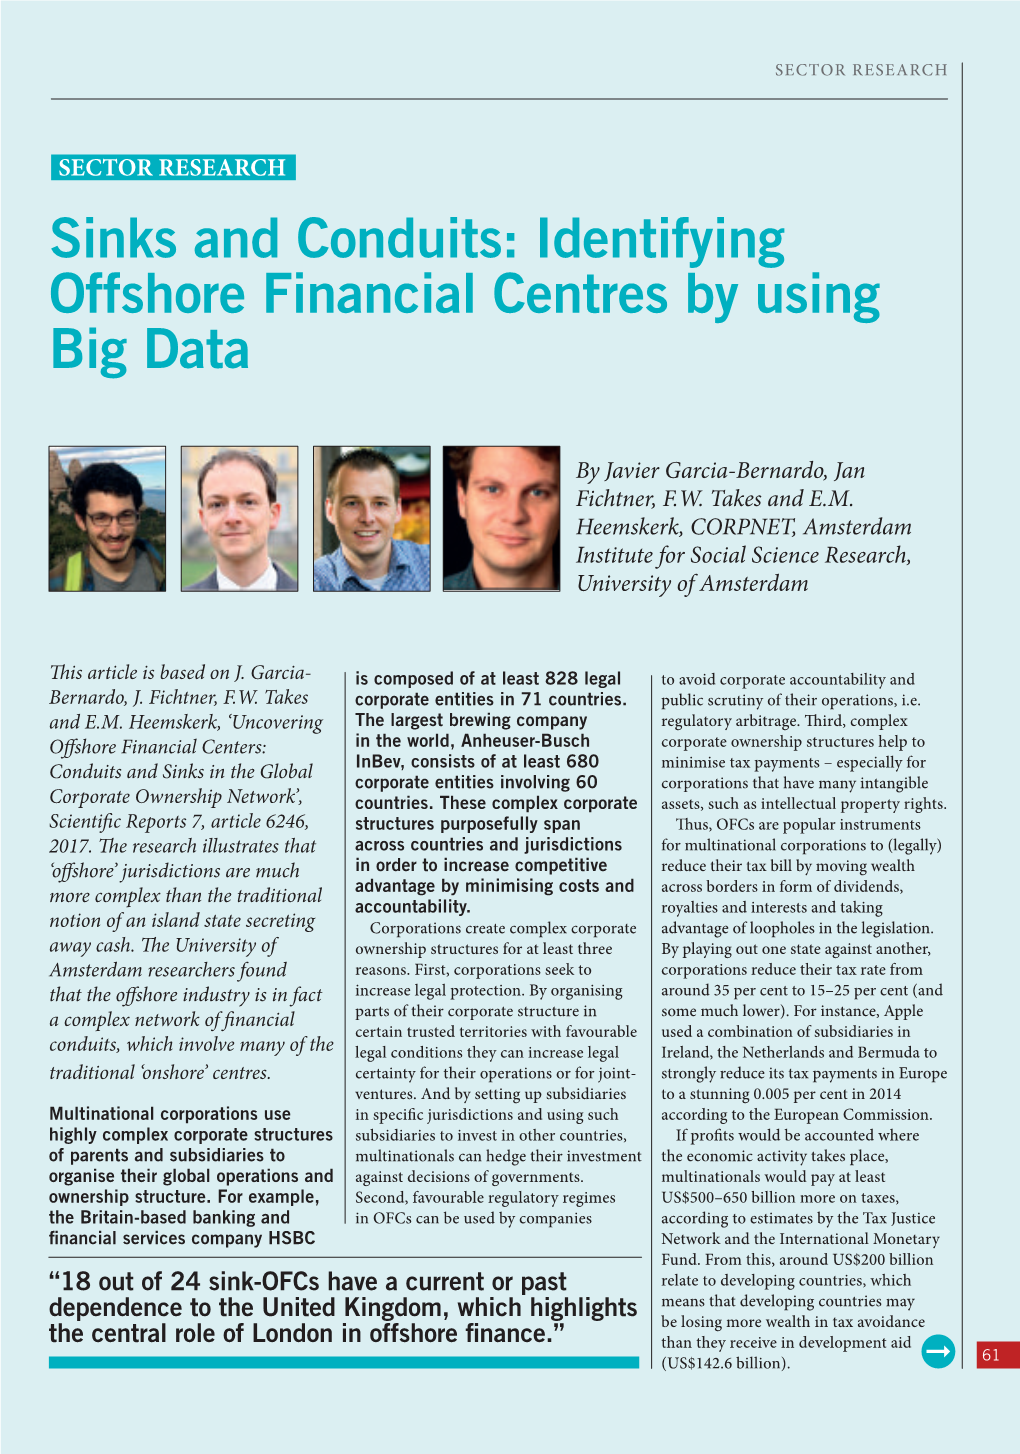 Sinks and Conduits: Identifying Offshore Financial Centres by Using Big Data